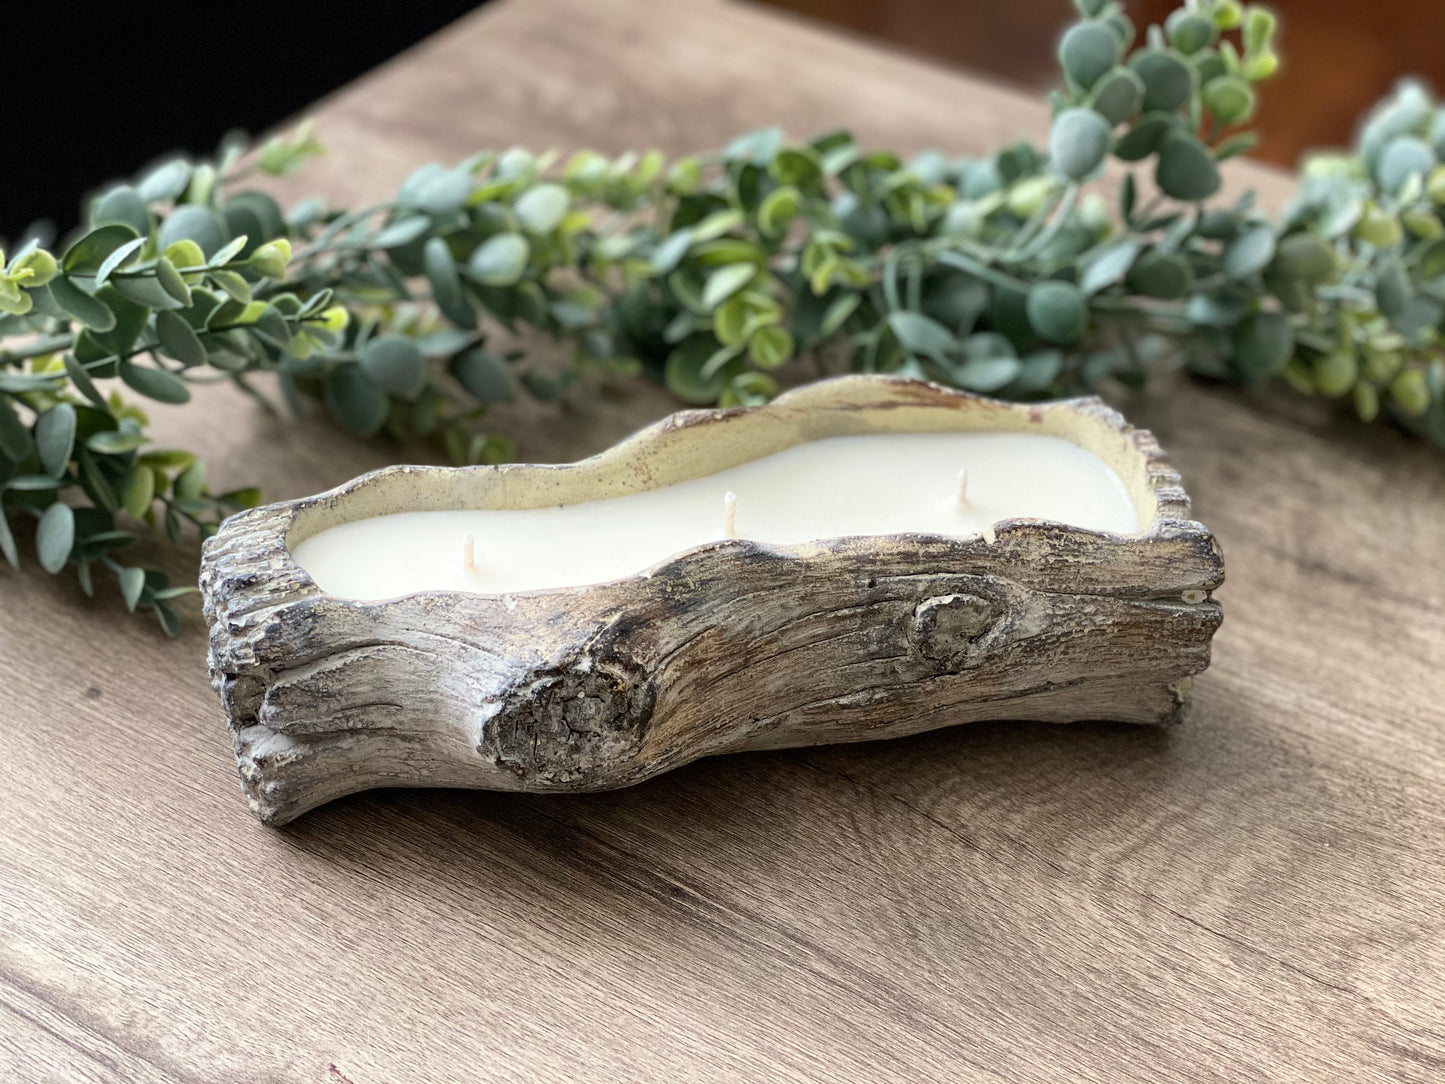 Cement Tree Log Decor Candle | Sea Minerals | 12 oz. A unique piece of home decor that works perfectly for indoor and outdoor space. When you finished the candle, this cement log can be used as planter, serving dish and decorative holder. Bluffton Candles - The Bluffton Shop - Gift Shops